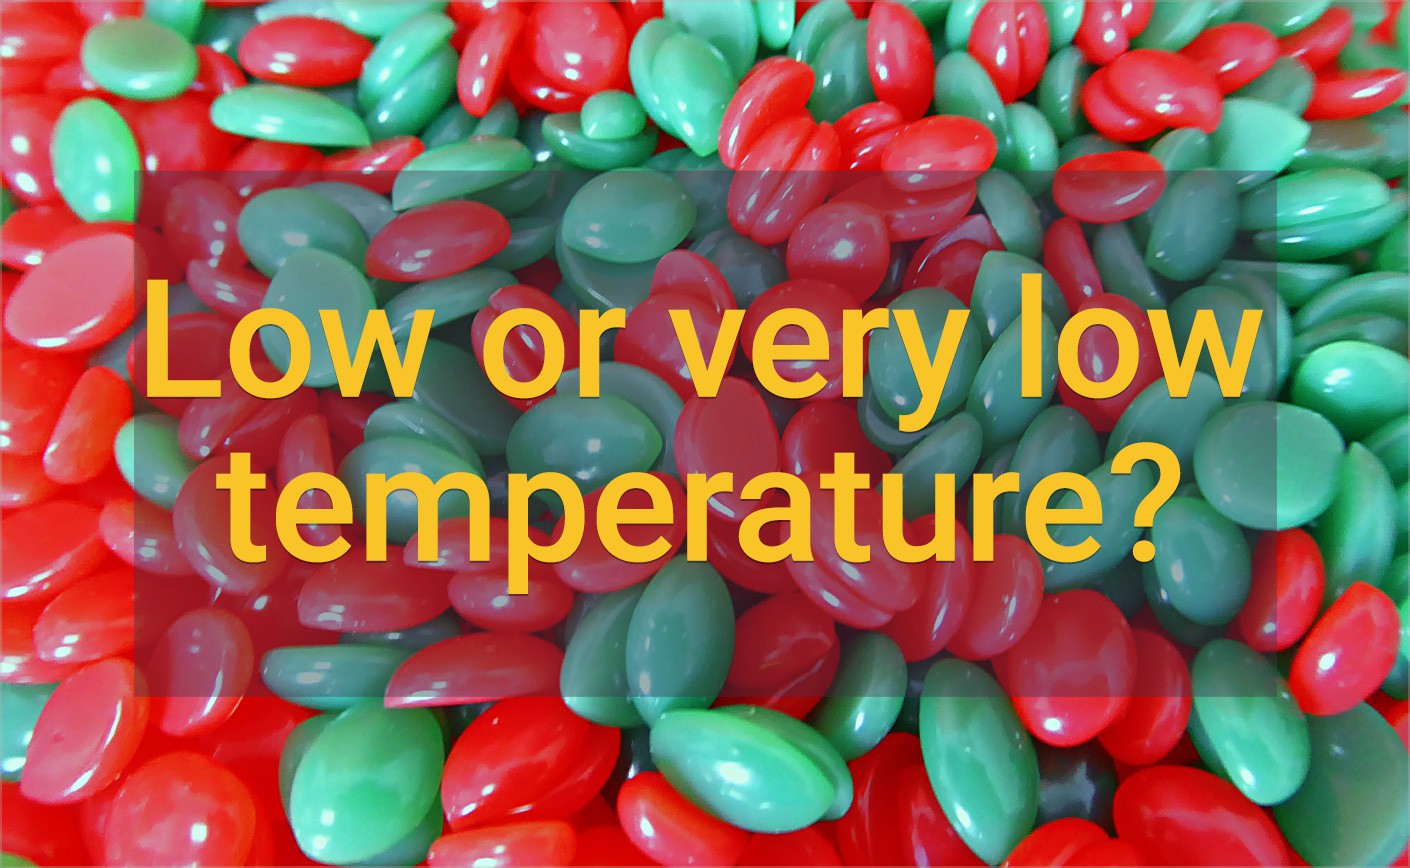 Low or very low temperature?